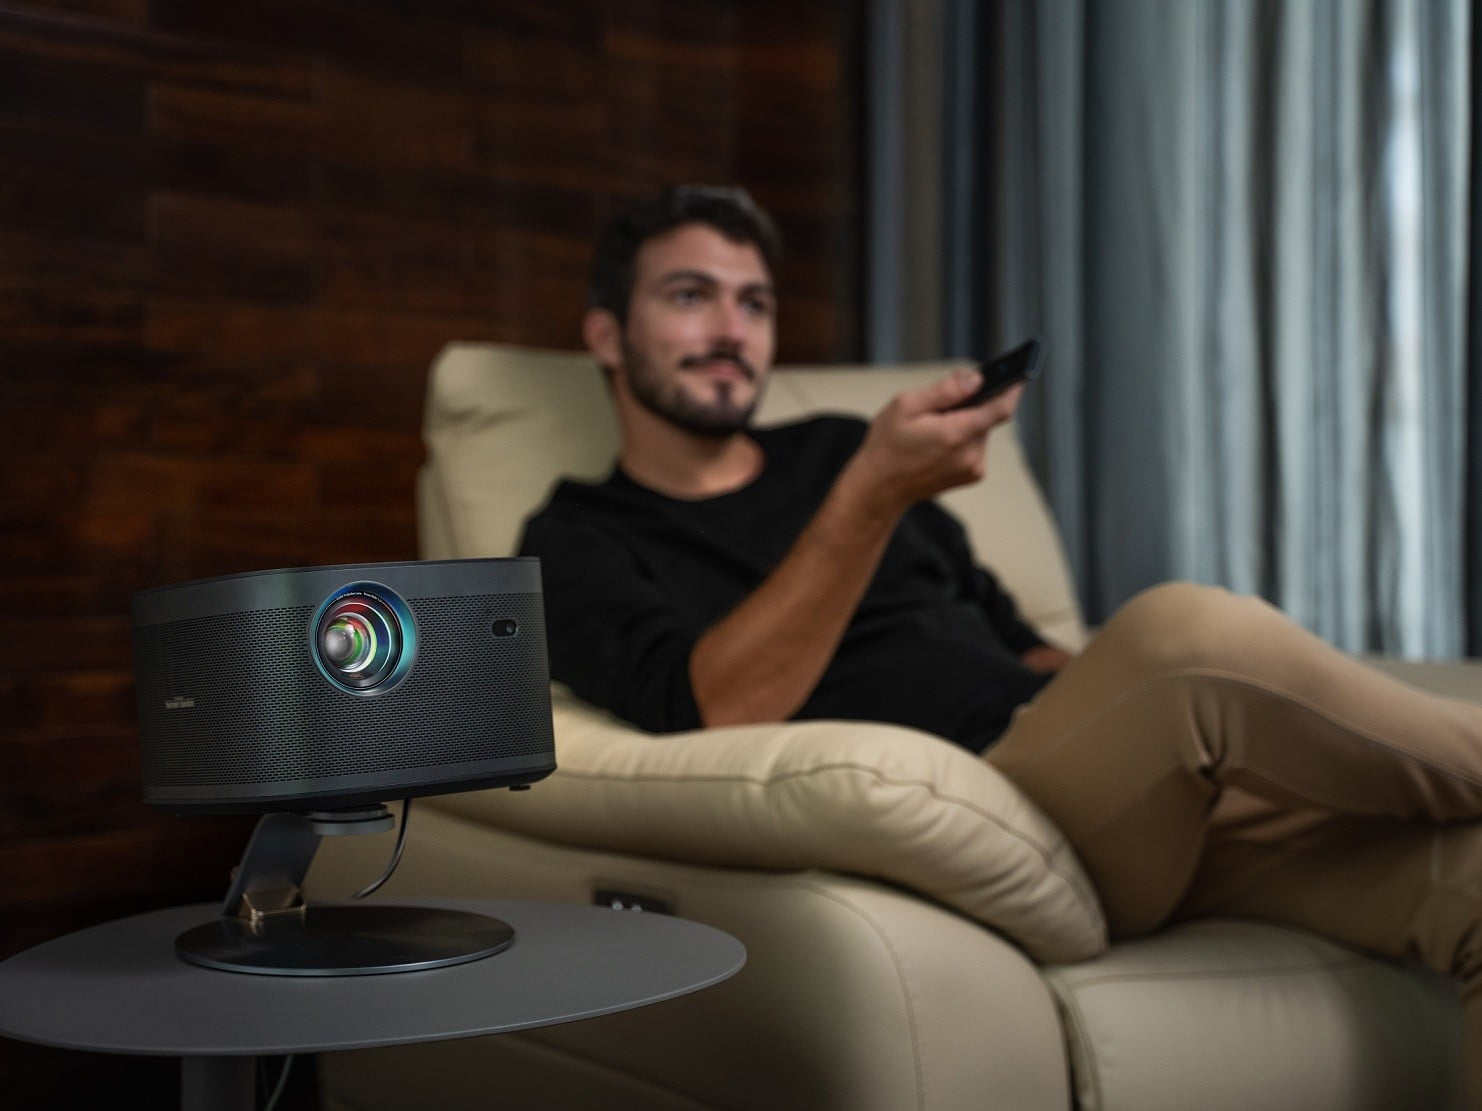 XGIMI Delivers Next-gen Projectors For Home Use